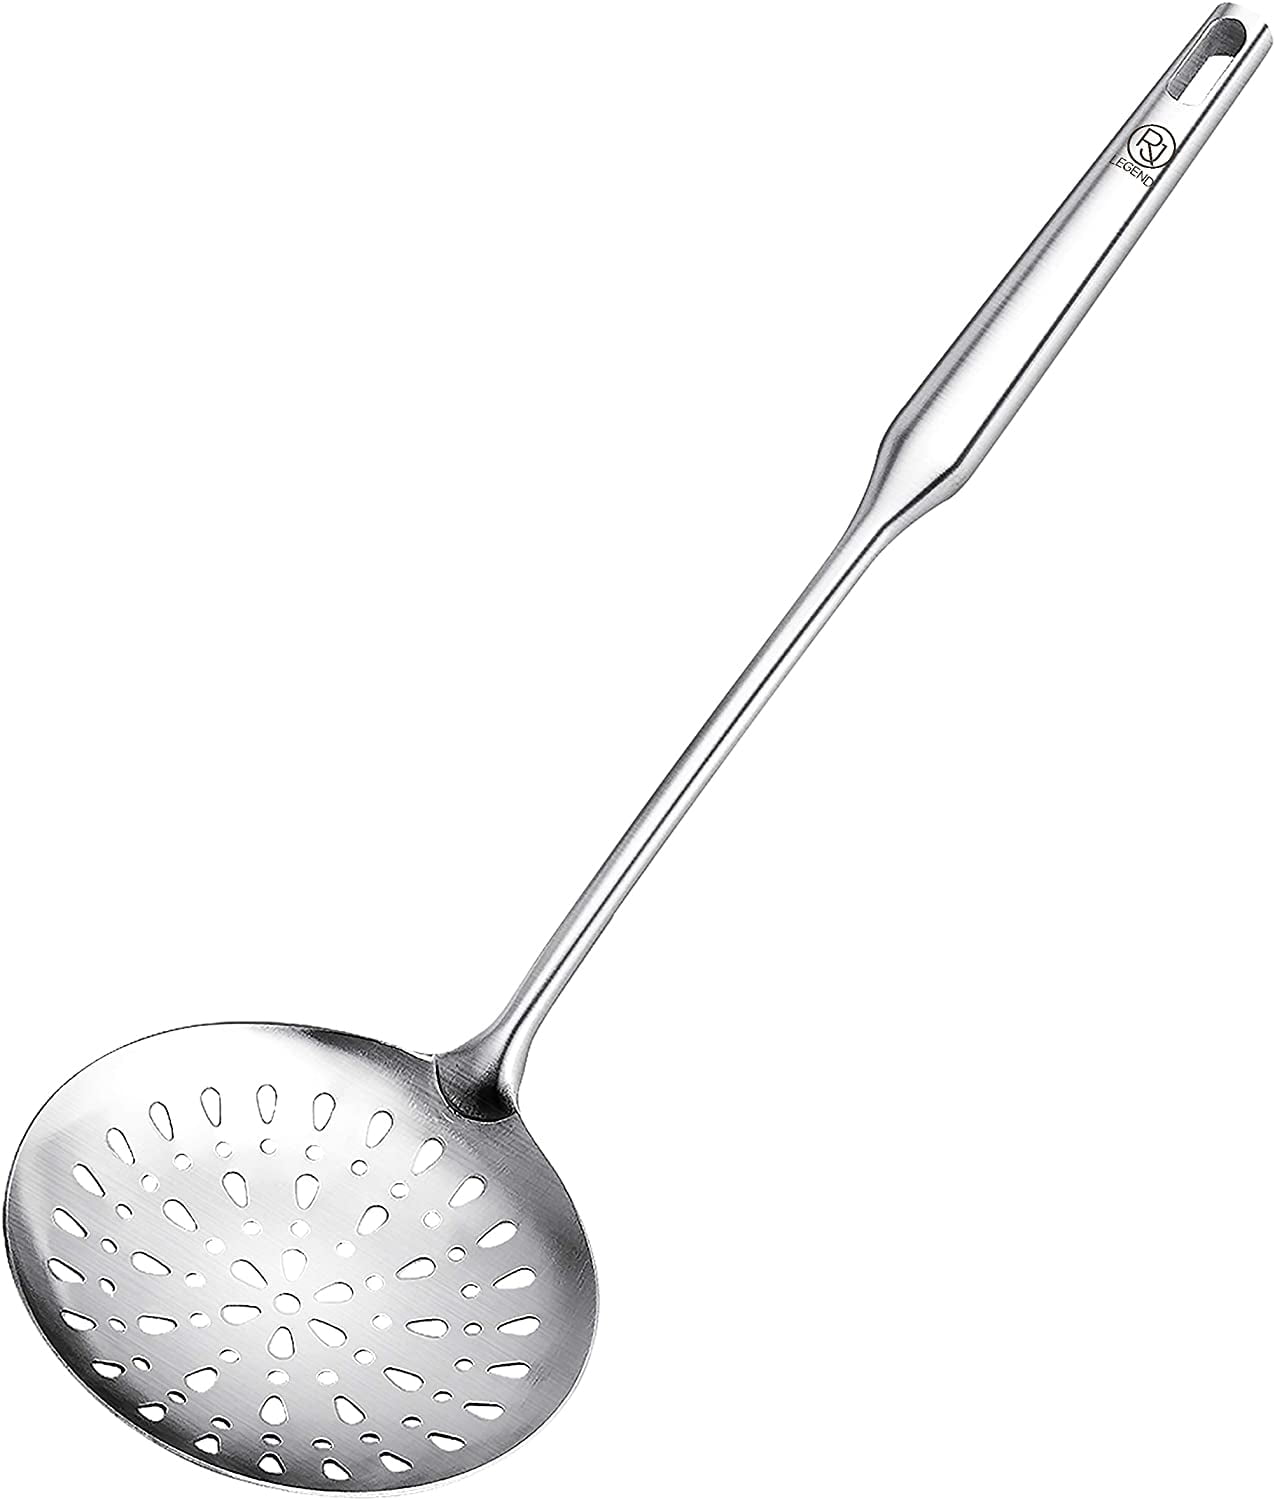 KAYCROWN Skimmer Slotted Spoon, 304 Stainless Steel Skimmer Ladle Skimmer  Spoon Spider Strainer for Cooking and Frying - AliExpress